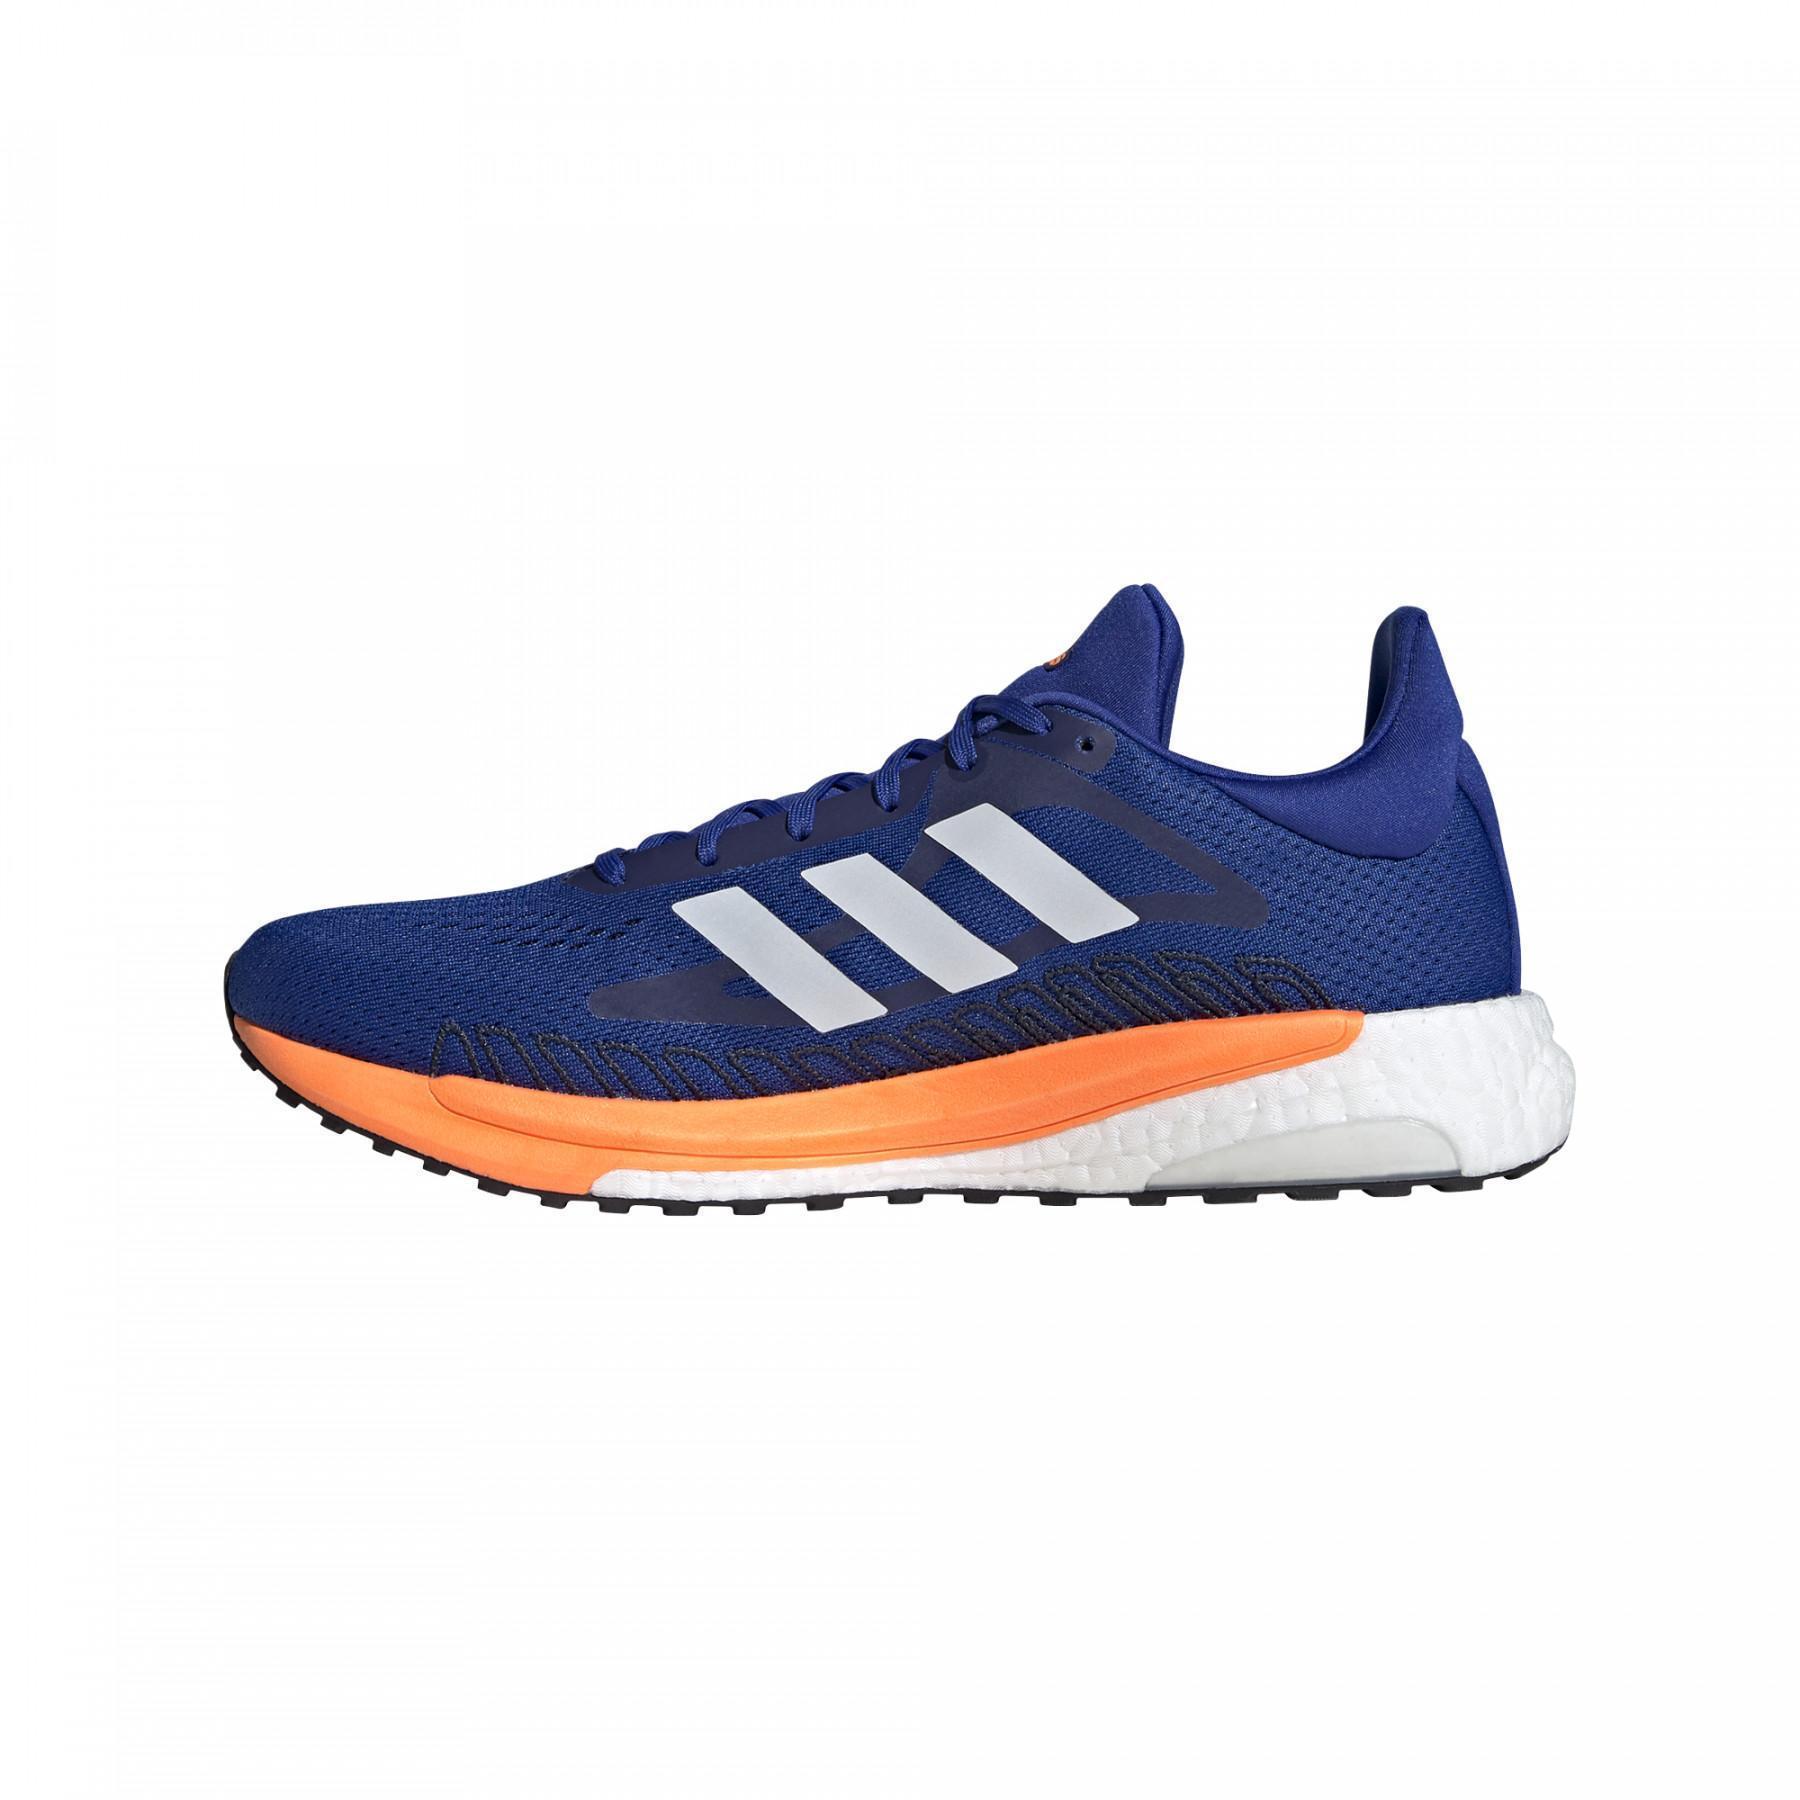 Running shoes adidas SolarGlide 3